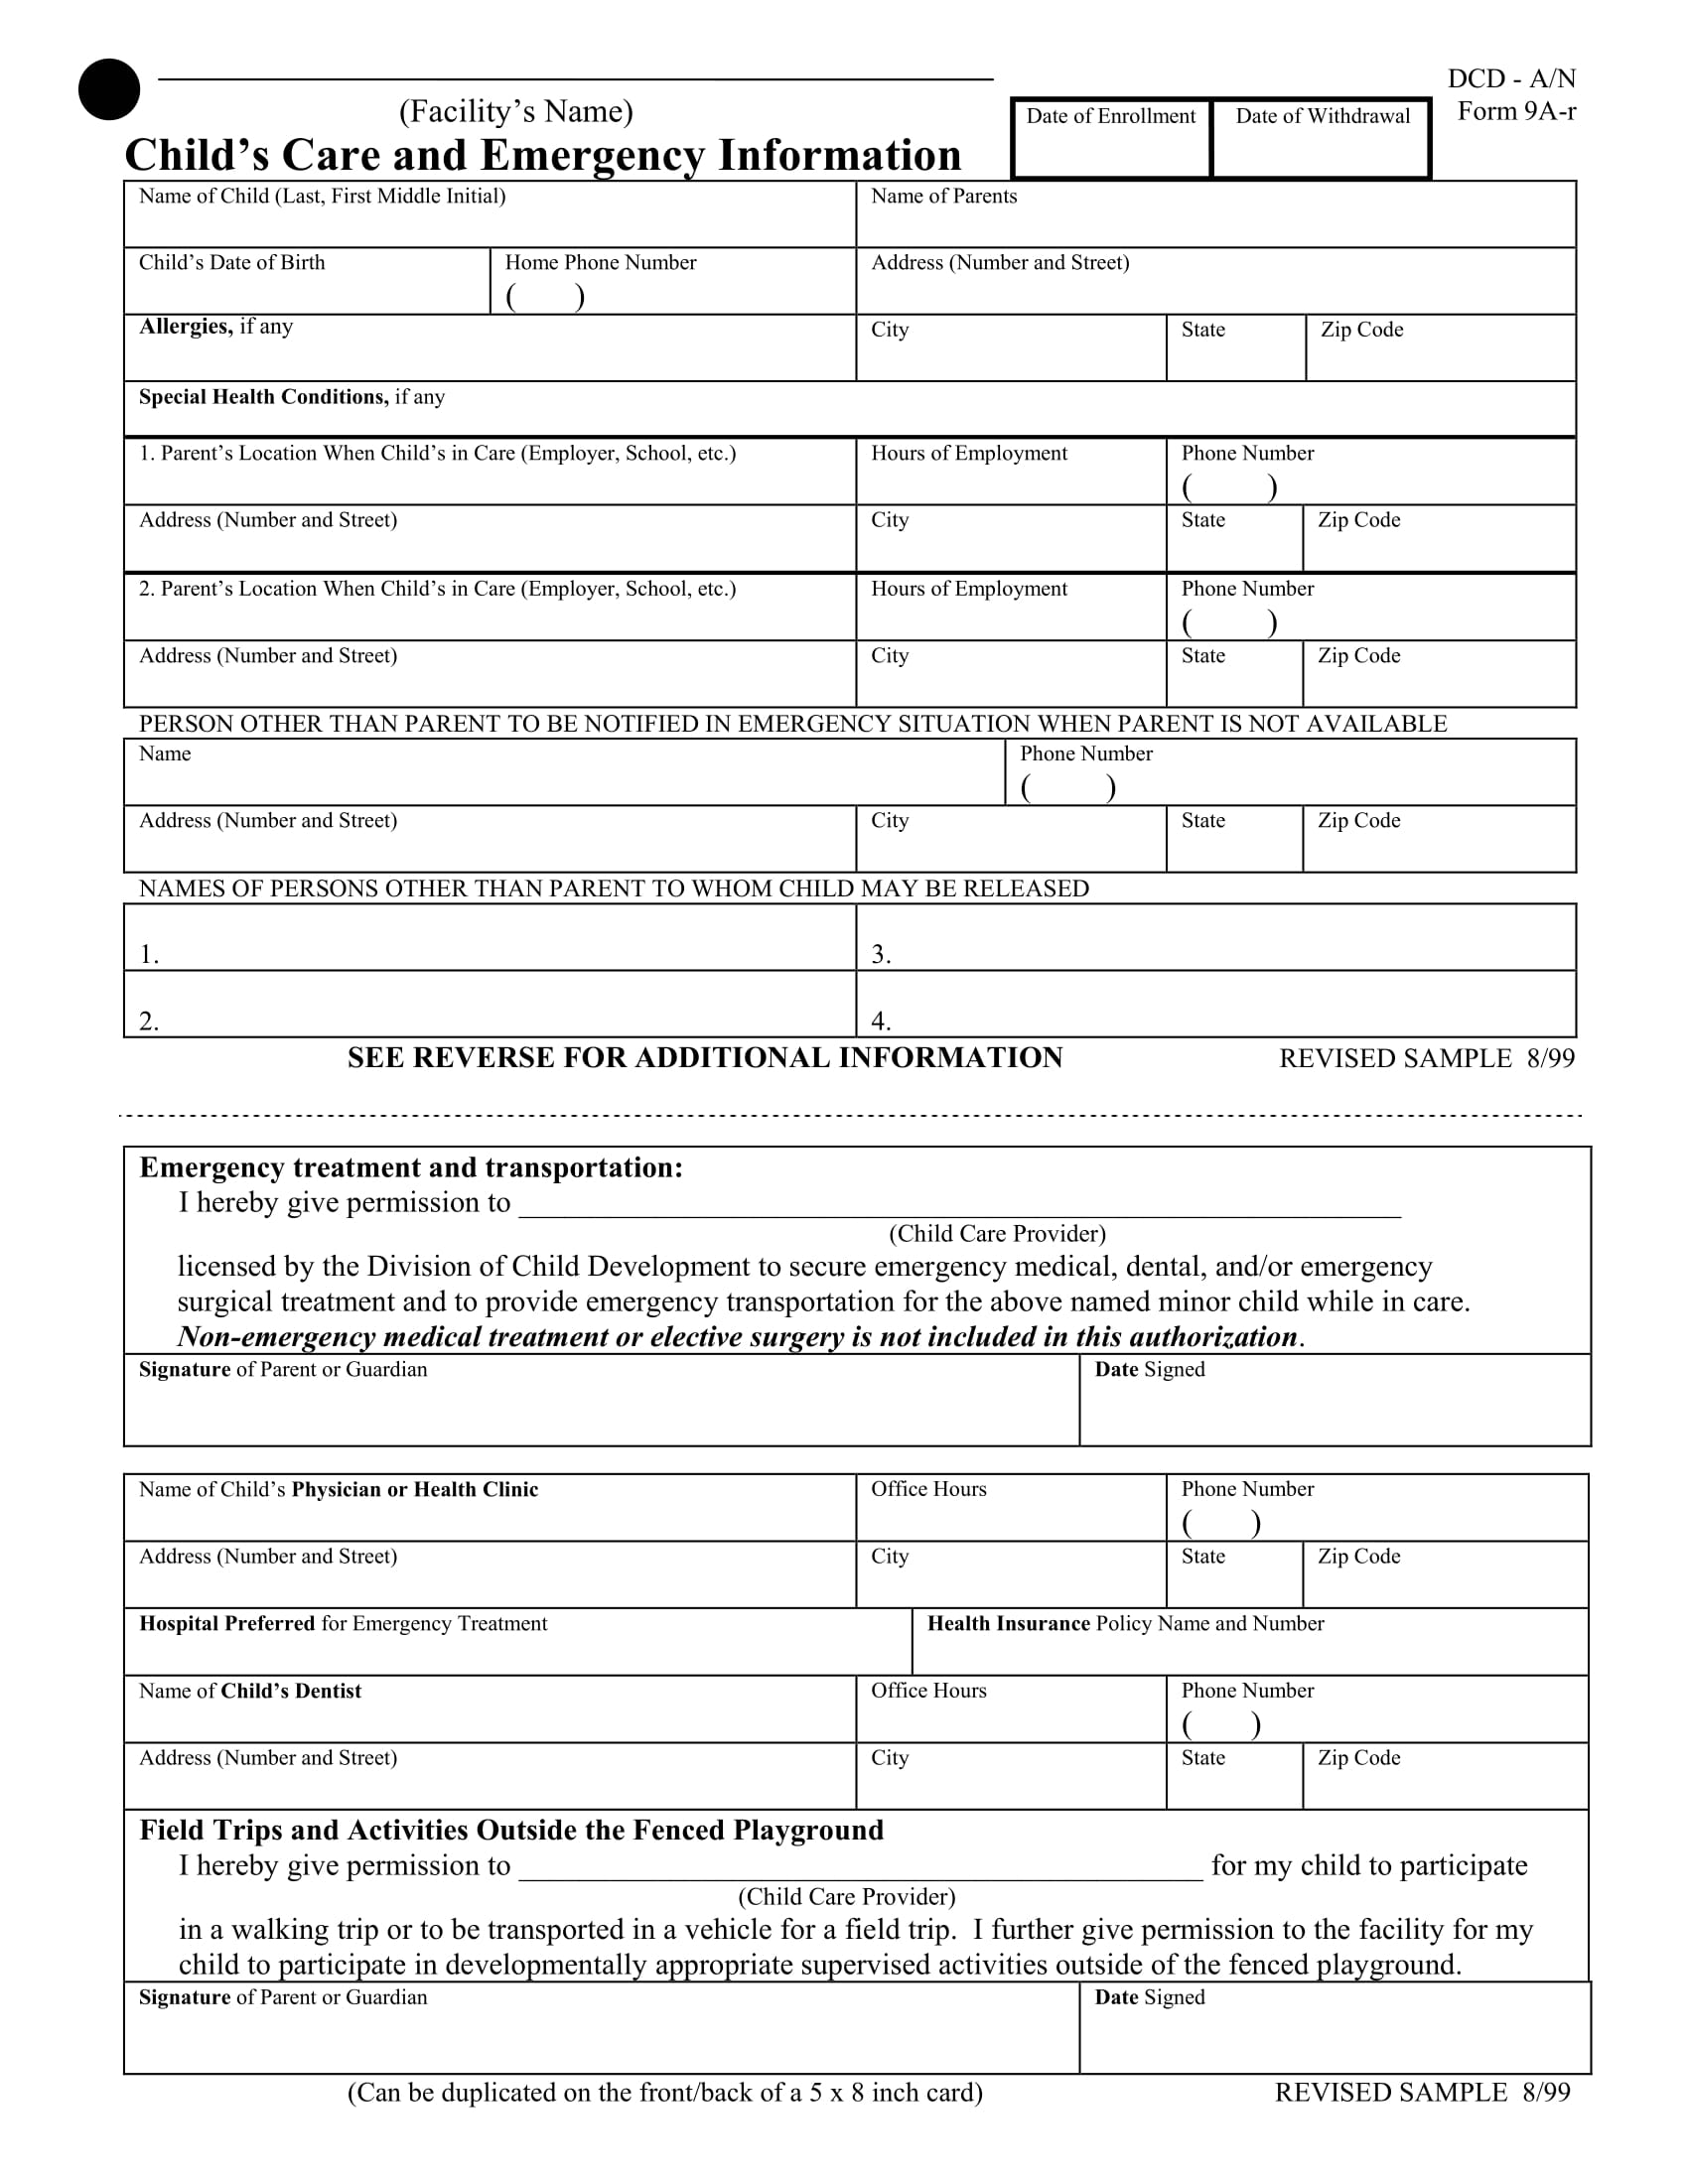 childs care and emergency information form